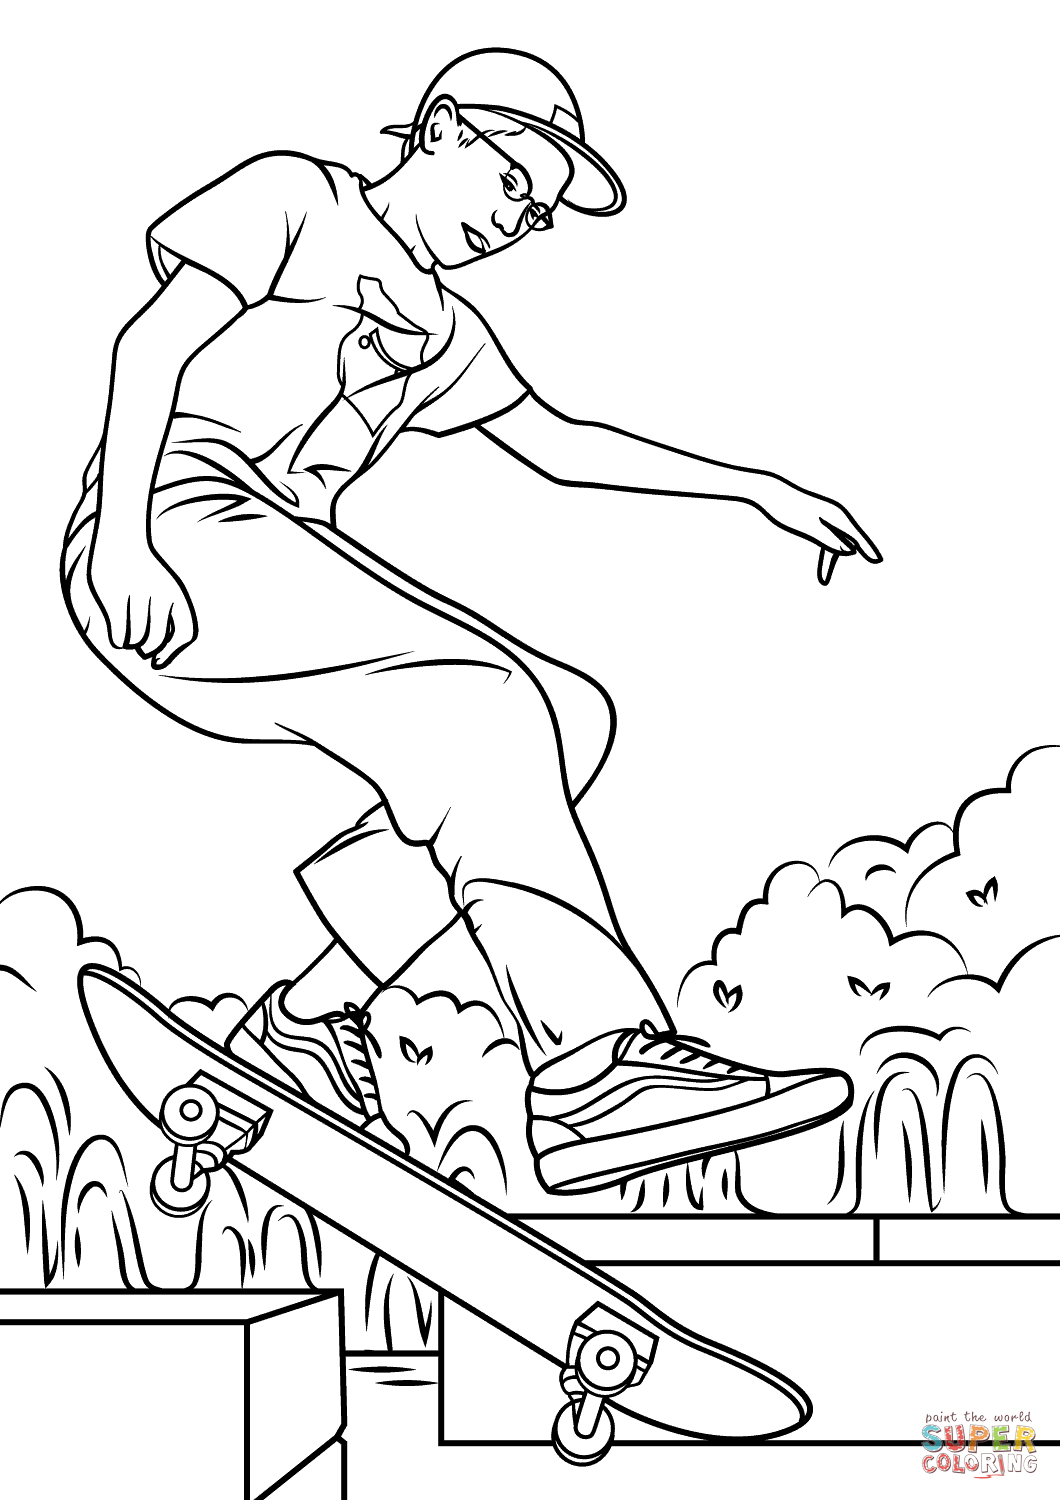 Boy Skateboarding coloring page | Free Printable Coloring Pages